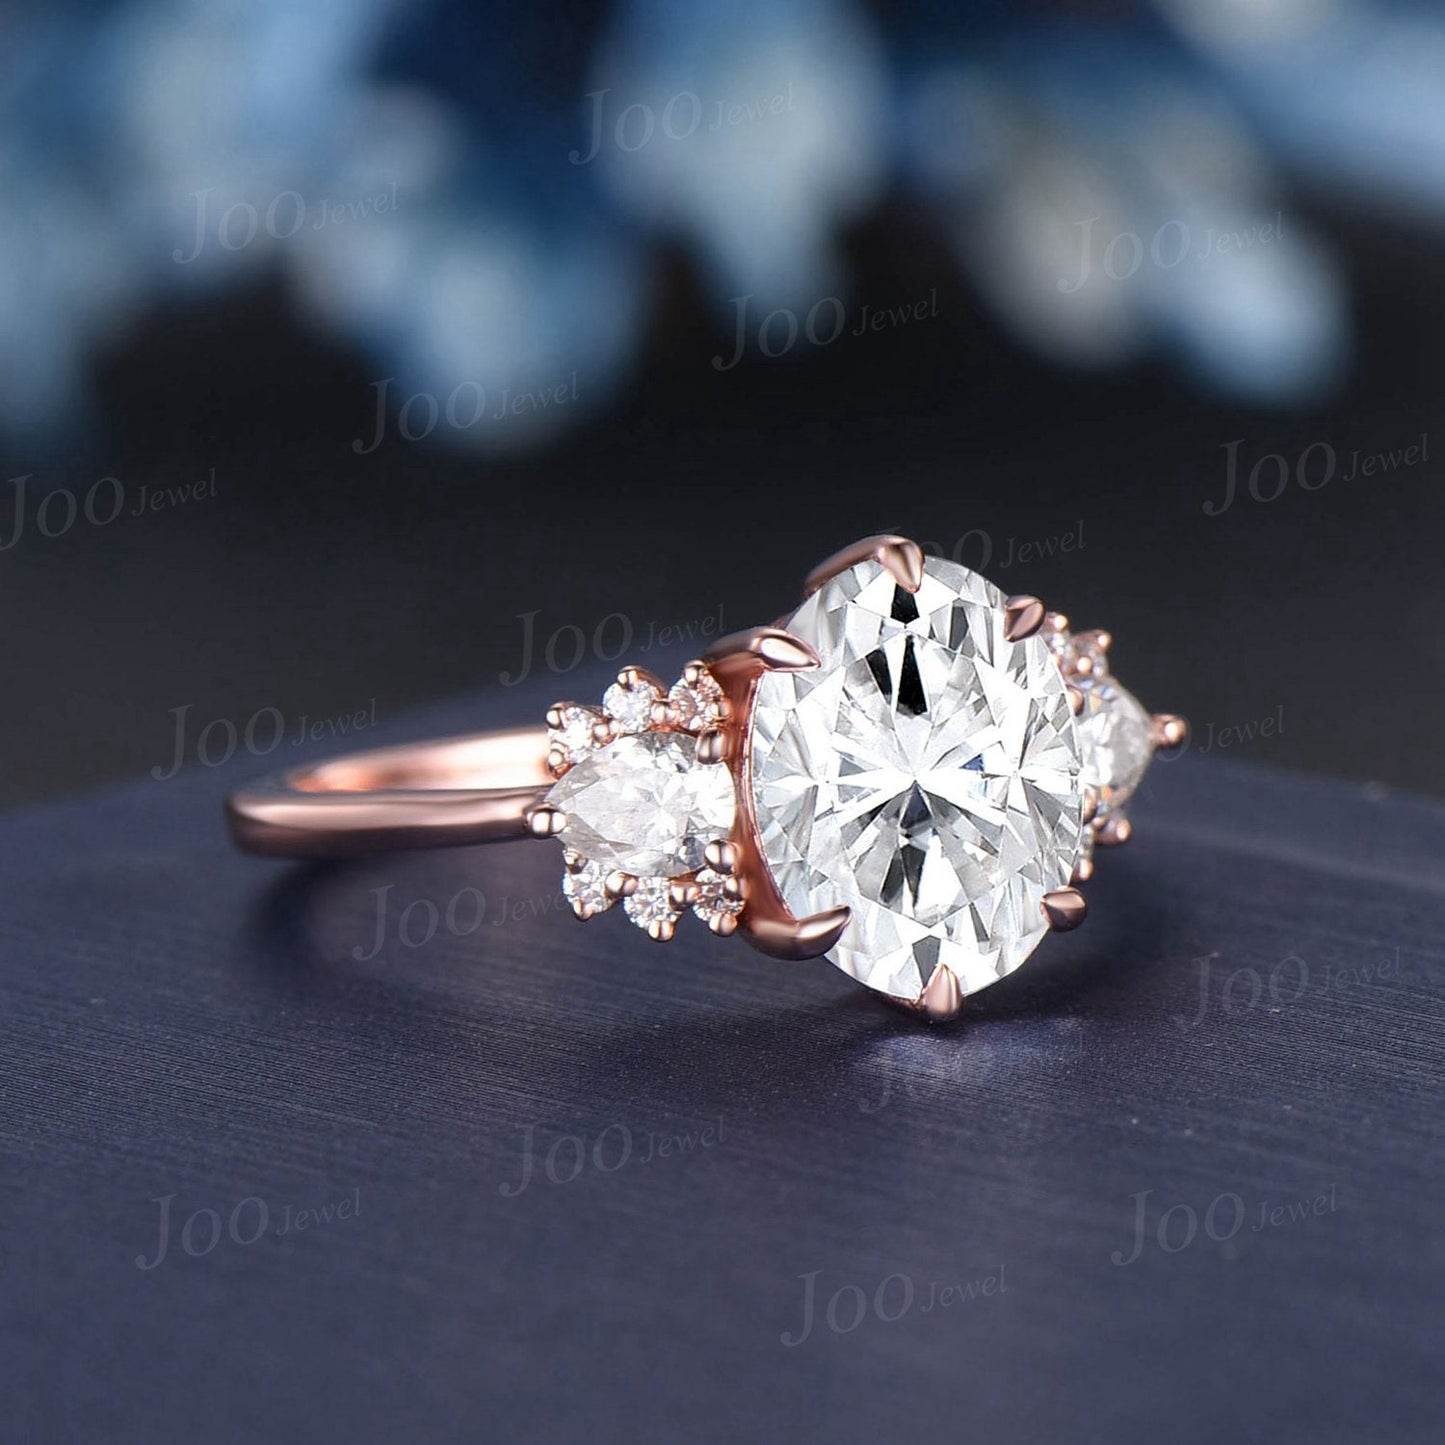 1.5ct Oval Moissanite Engagement Ring, Pear Shaped Diamond Wedding Ring,Cluster Vintage Promise Ring Unique Anniversary Gift for Women Wife